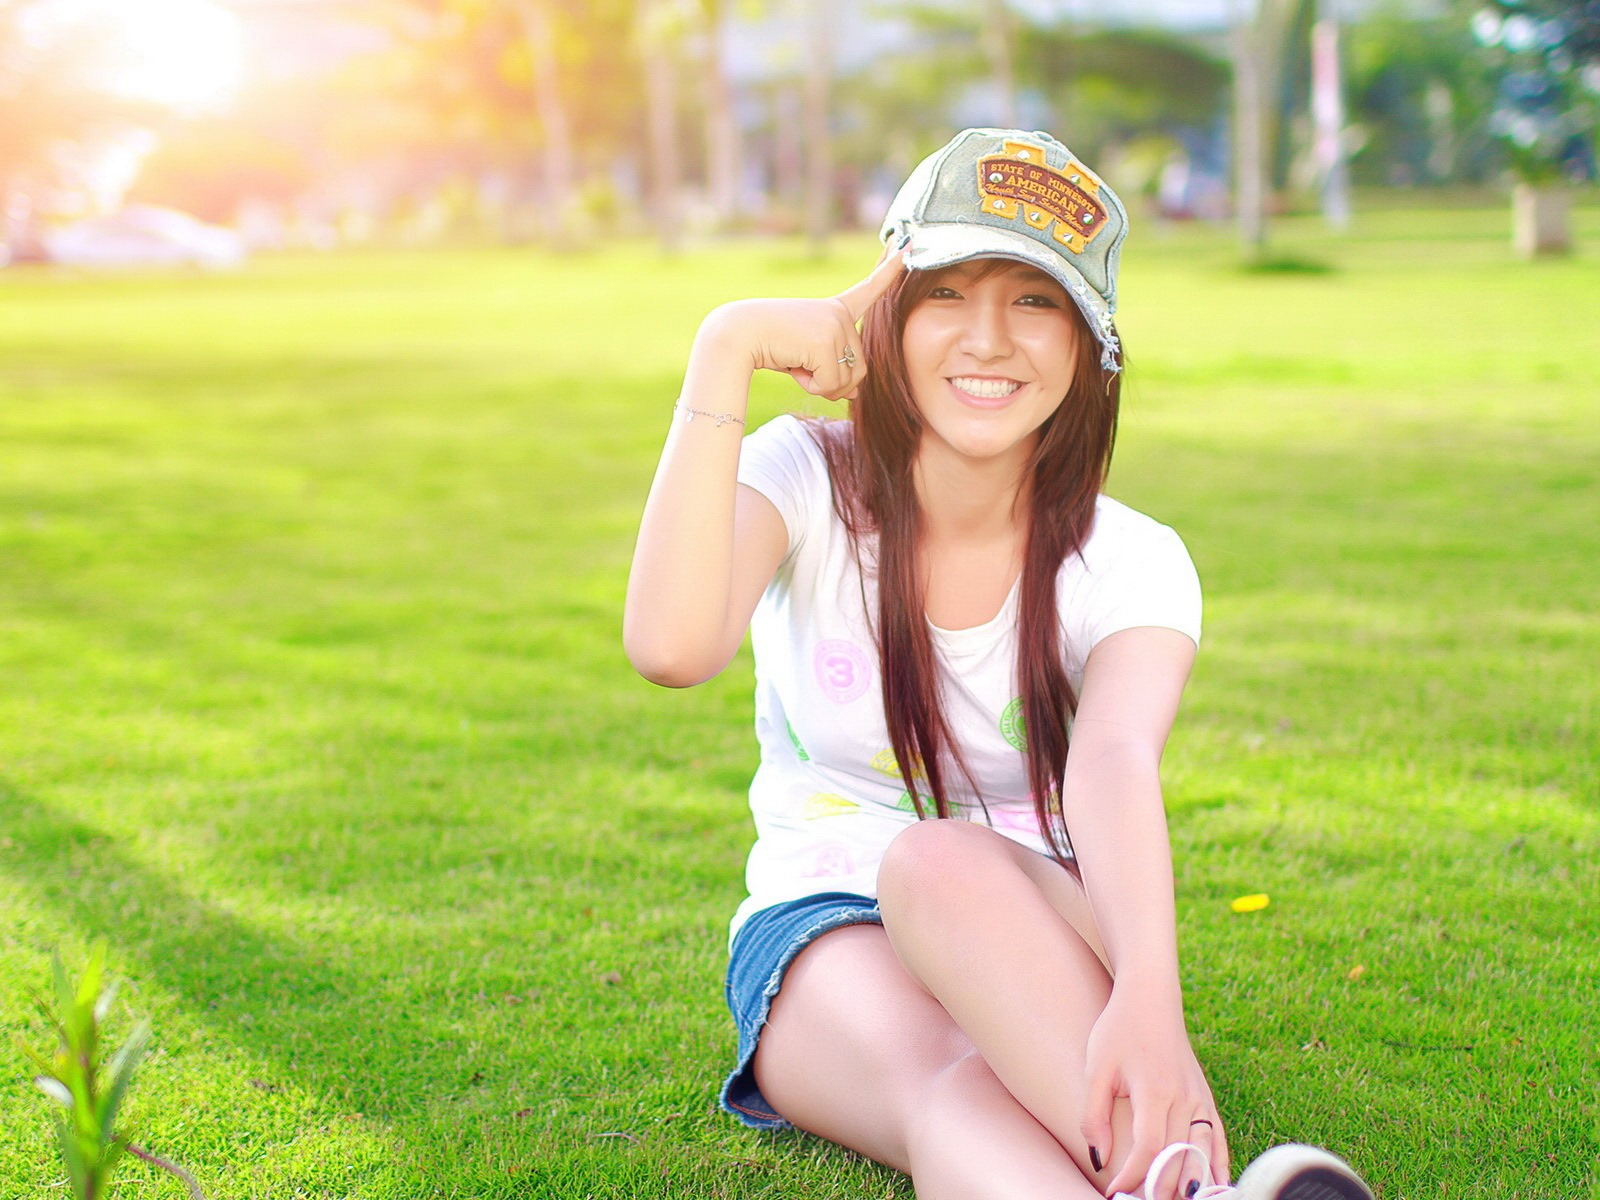 Pure and lovely young Asian girl HD wallpapers collection (5) #36 - 1600x1200